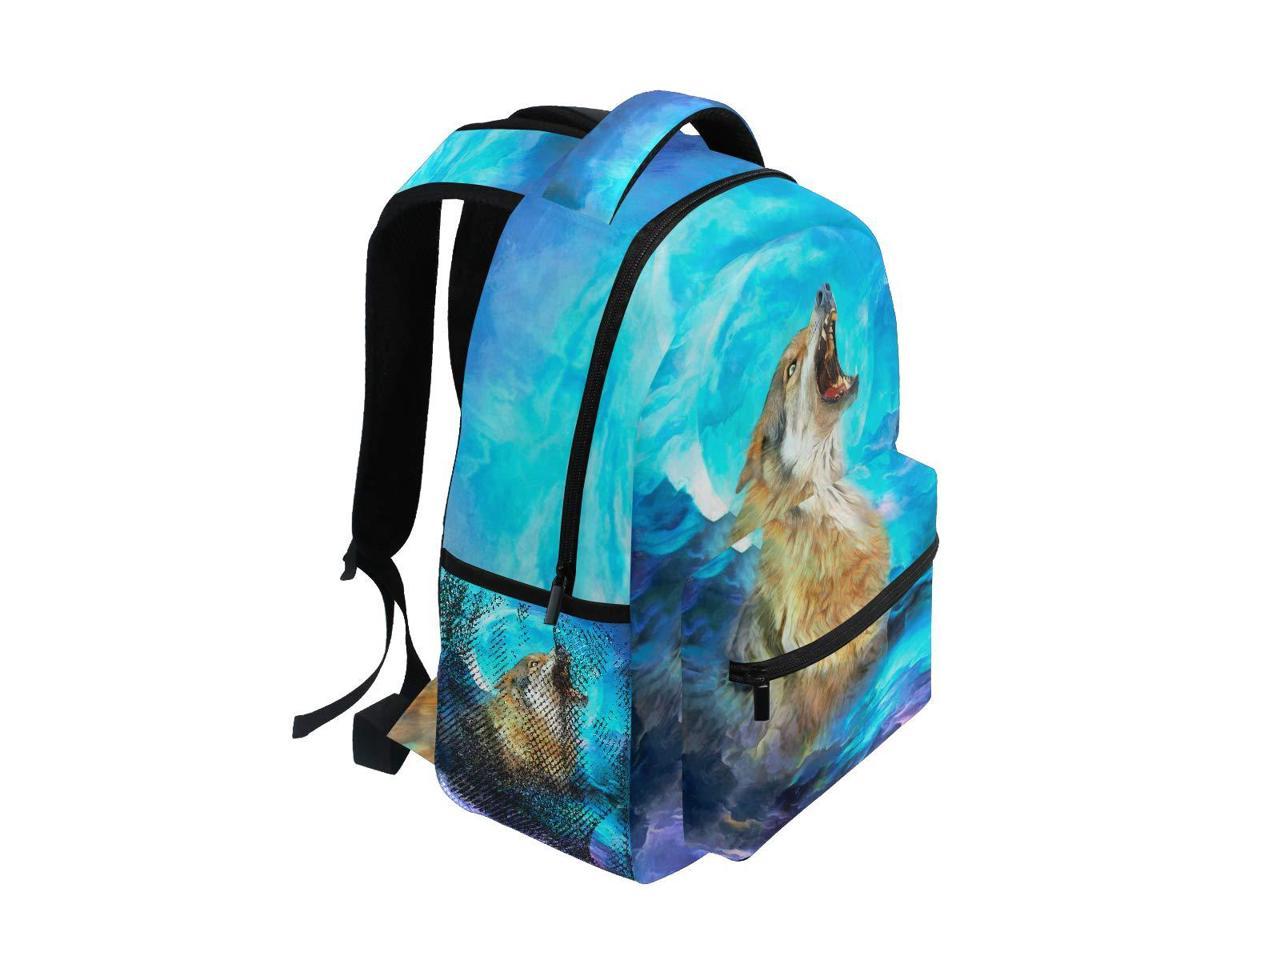 ZZKKO Universe Space Galaxy Moon Backpacks College Book Laptop Bag Camping Hiking Travel Daypack 